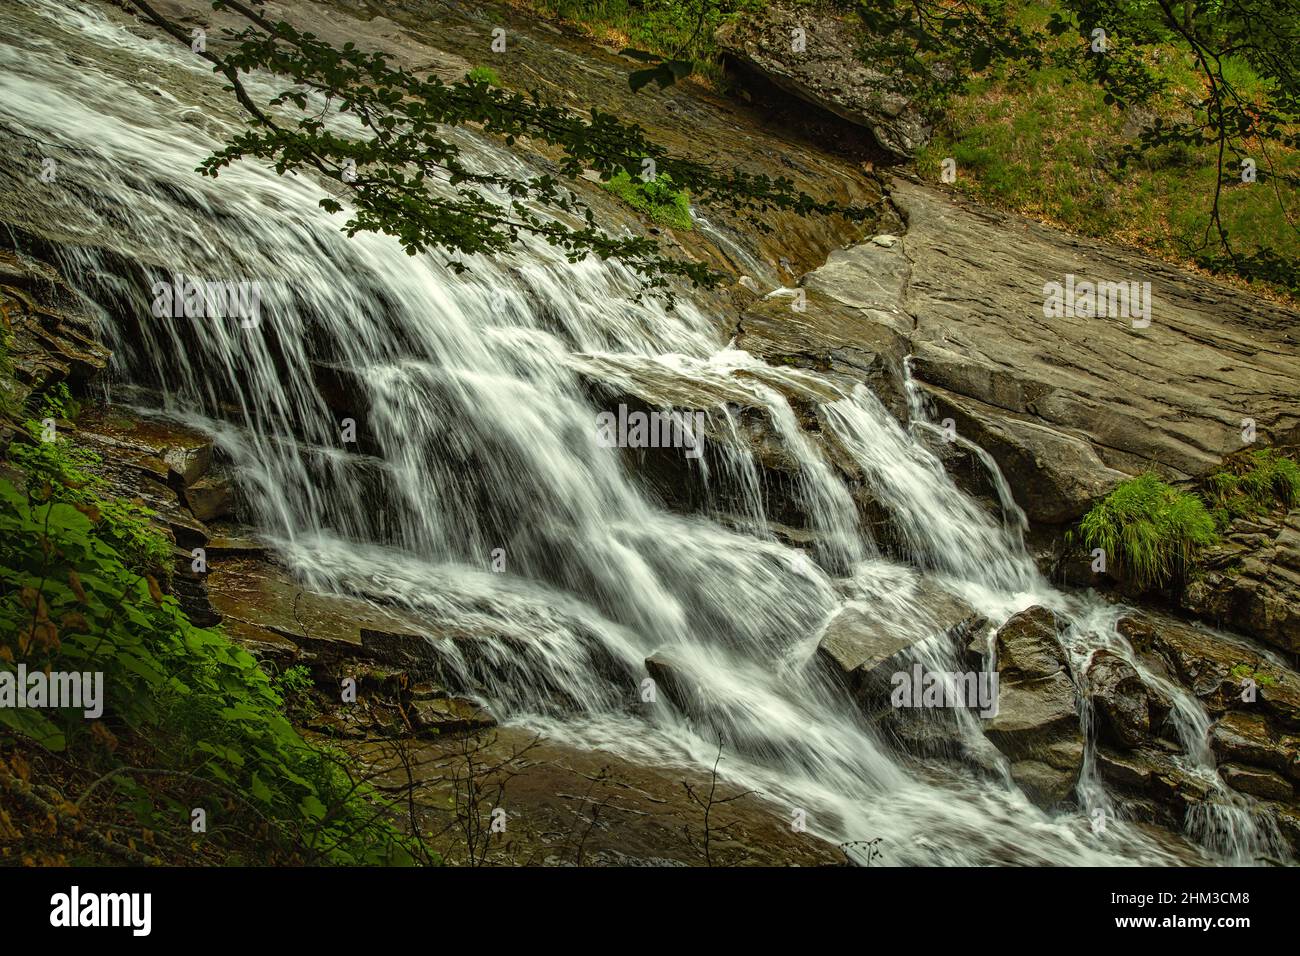 Waterfalls and water slides on the sandstone slabs of the Fosso dell'Acero. Cesacastina, Teramo province, Abruzzo, Italy, Europe. Stock Photo